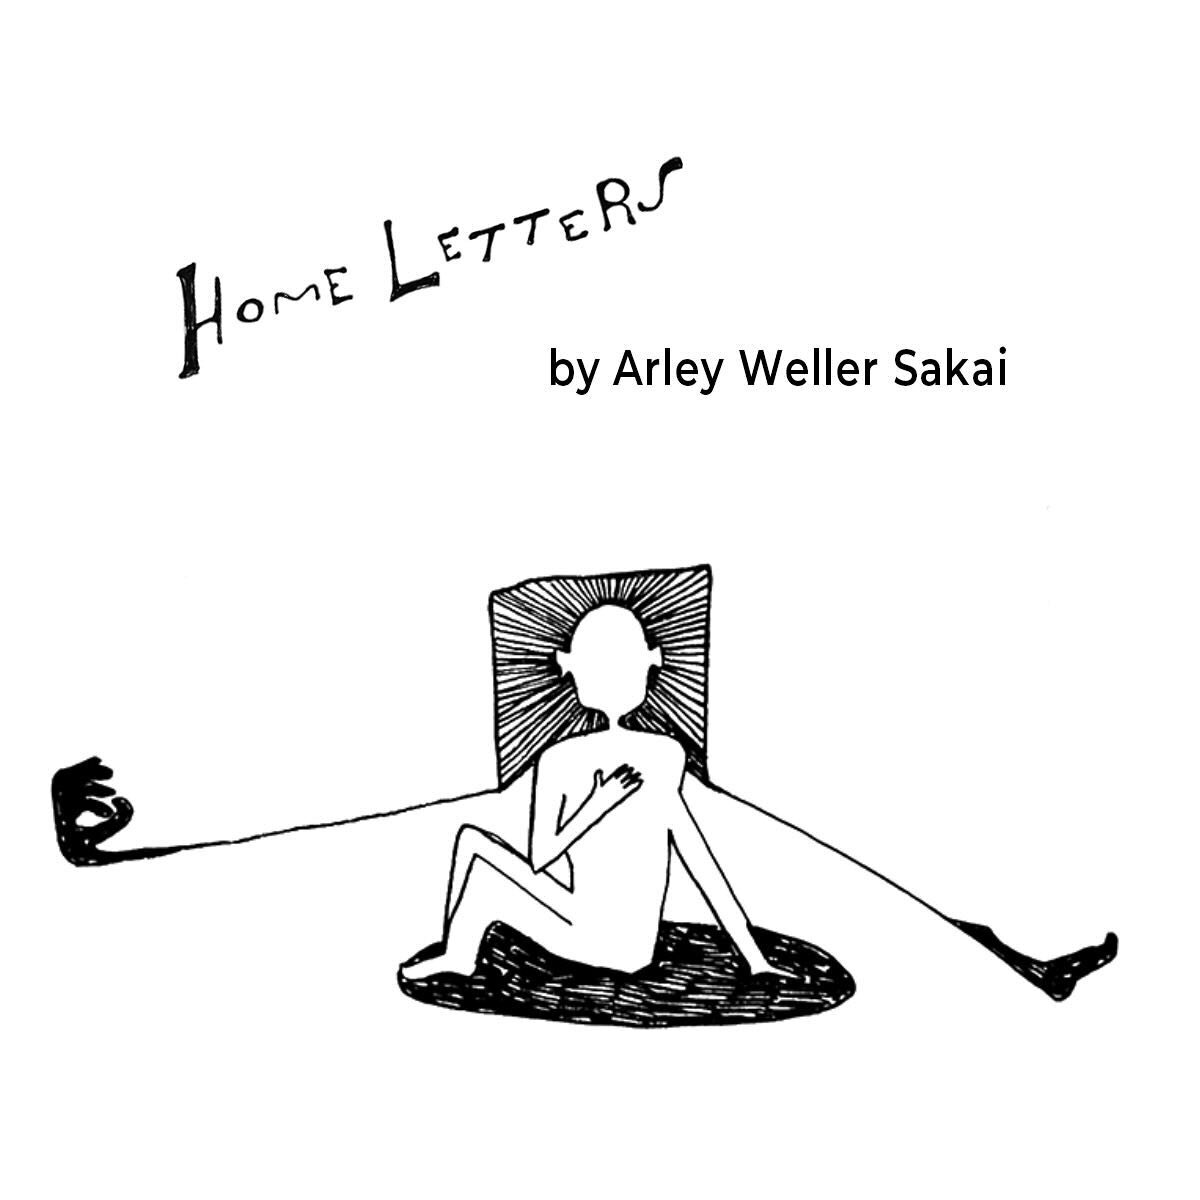 First up for Winter is&nbsp;&ldquo;Home Letters&rdquo; by Arley Weller Sakai, a captivating creative essay that explores identity and belonging through introspective letters, eloquently delving into
 the intricate relationship between self and space 